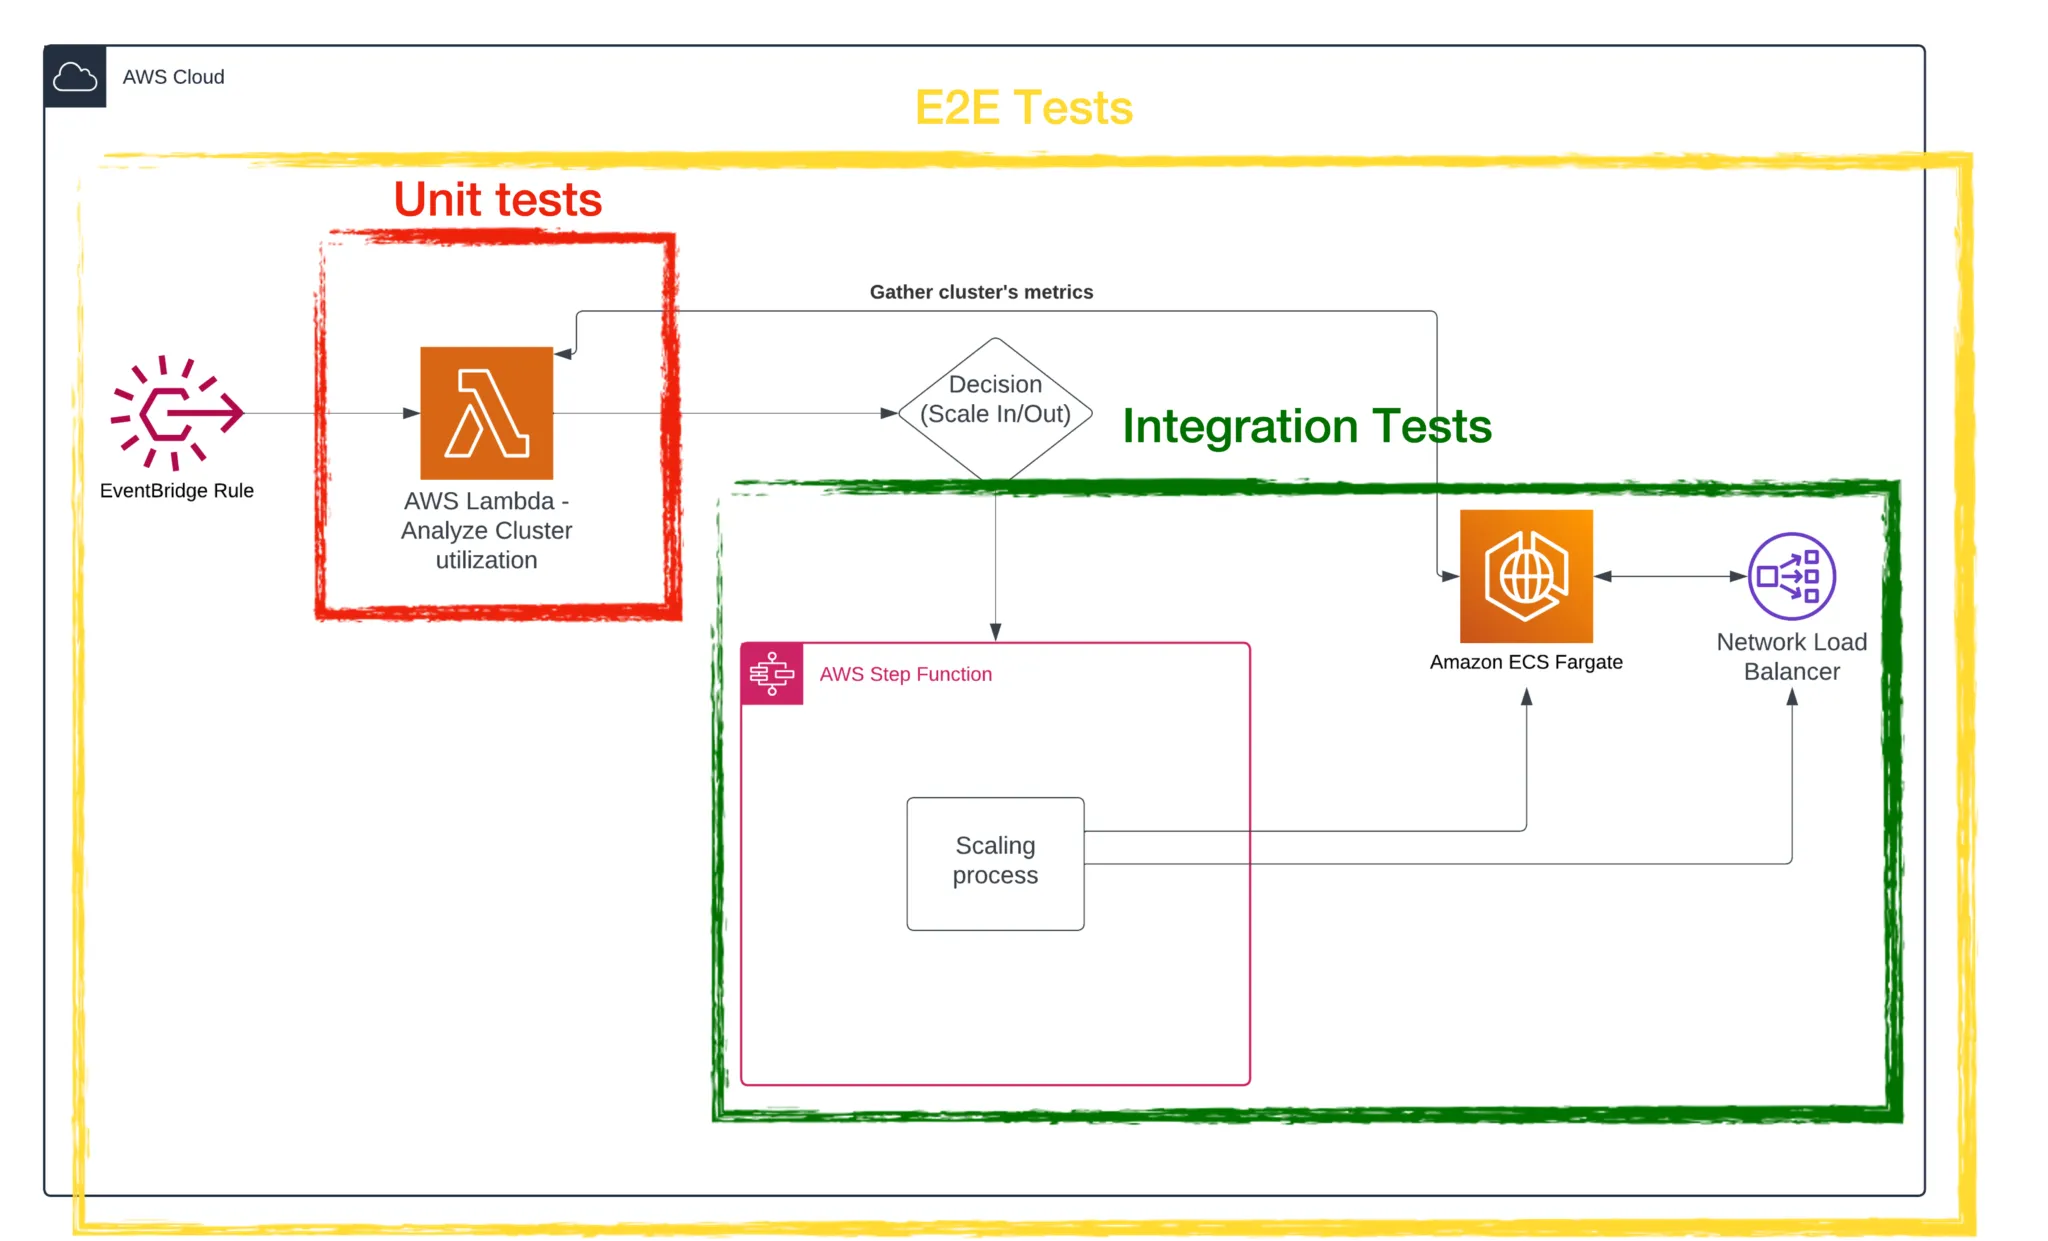 E2E, Integration and Unit tests of cloud infrastructure